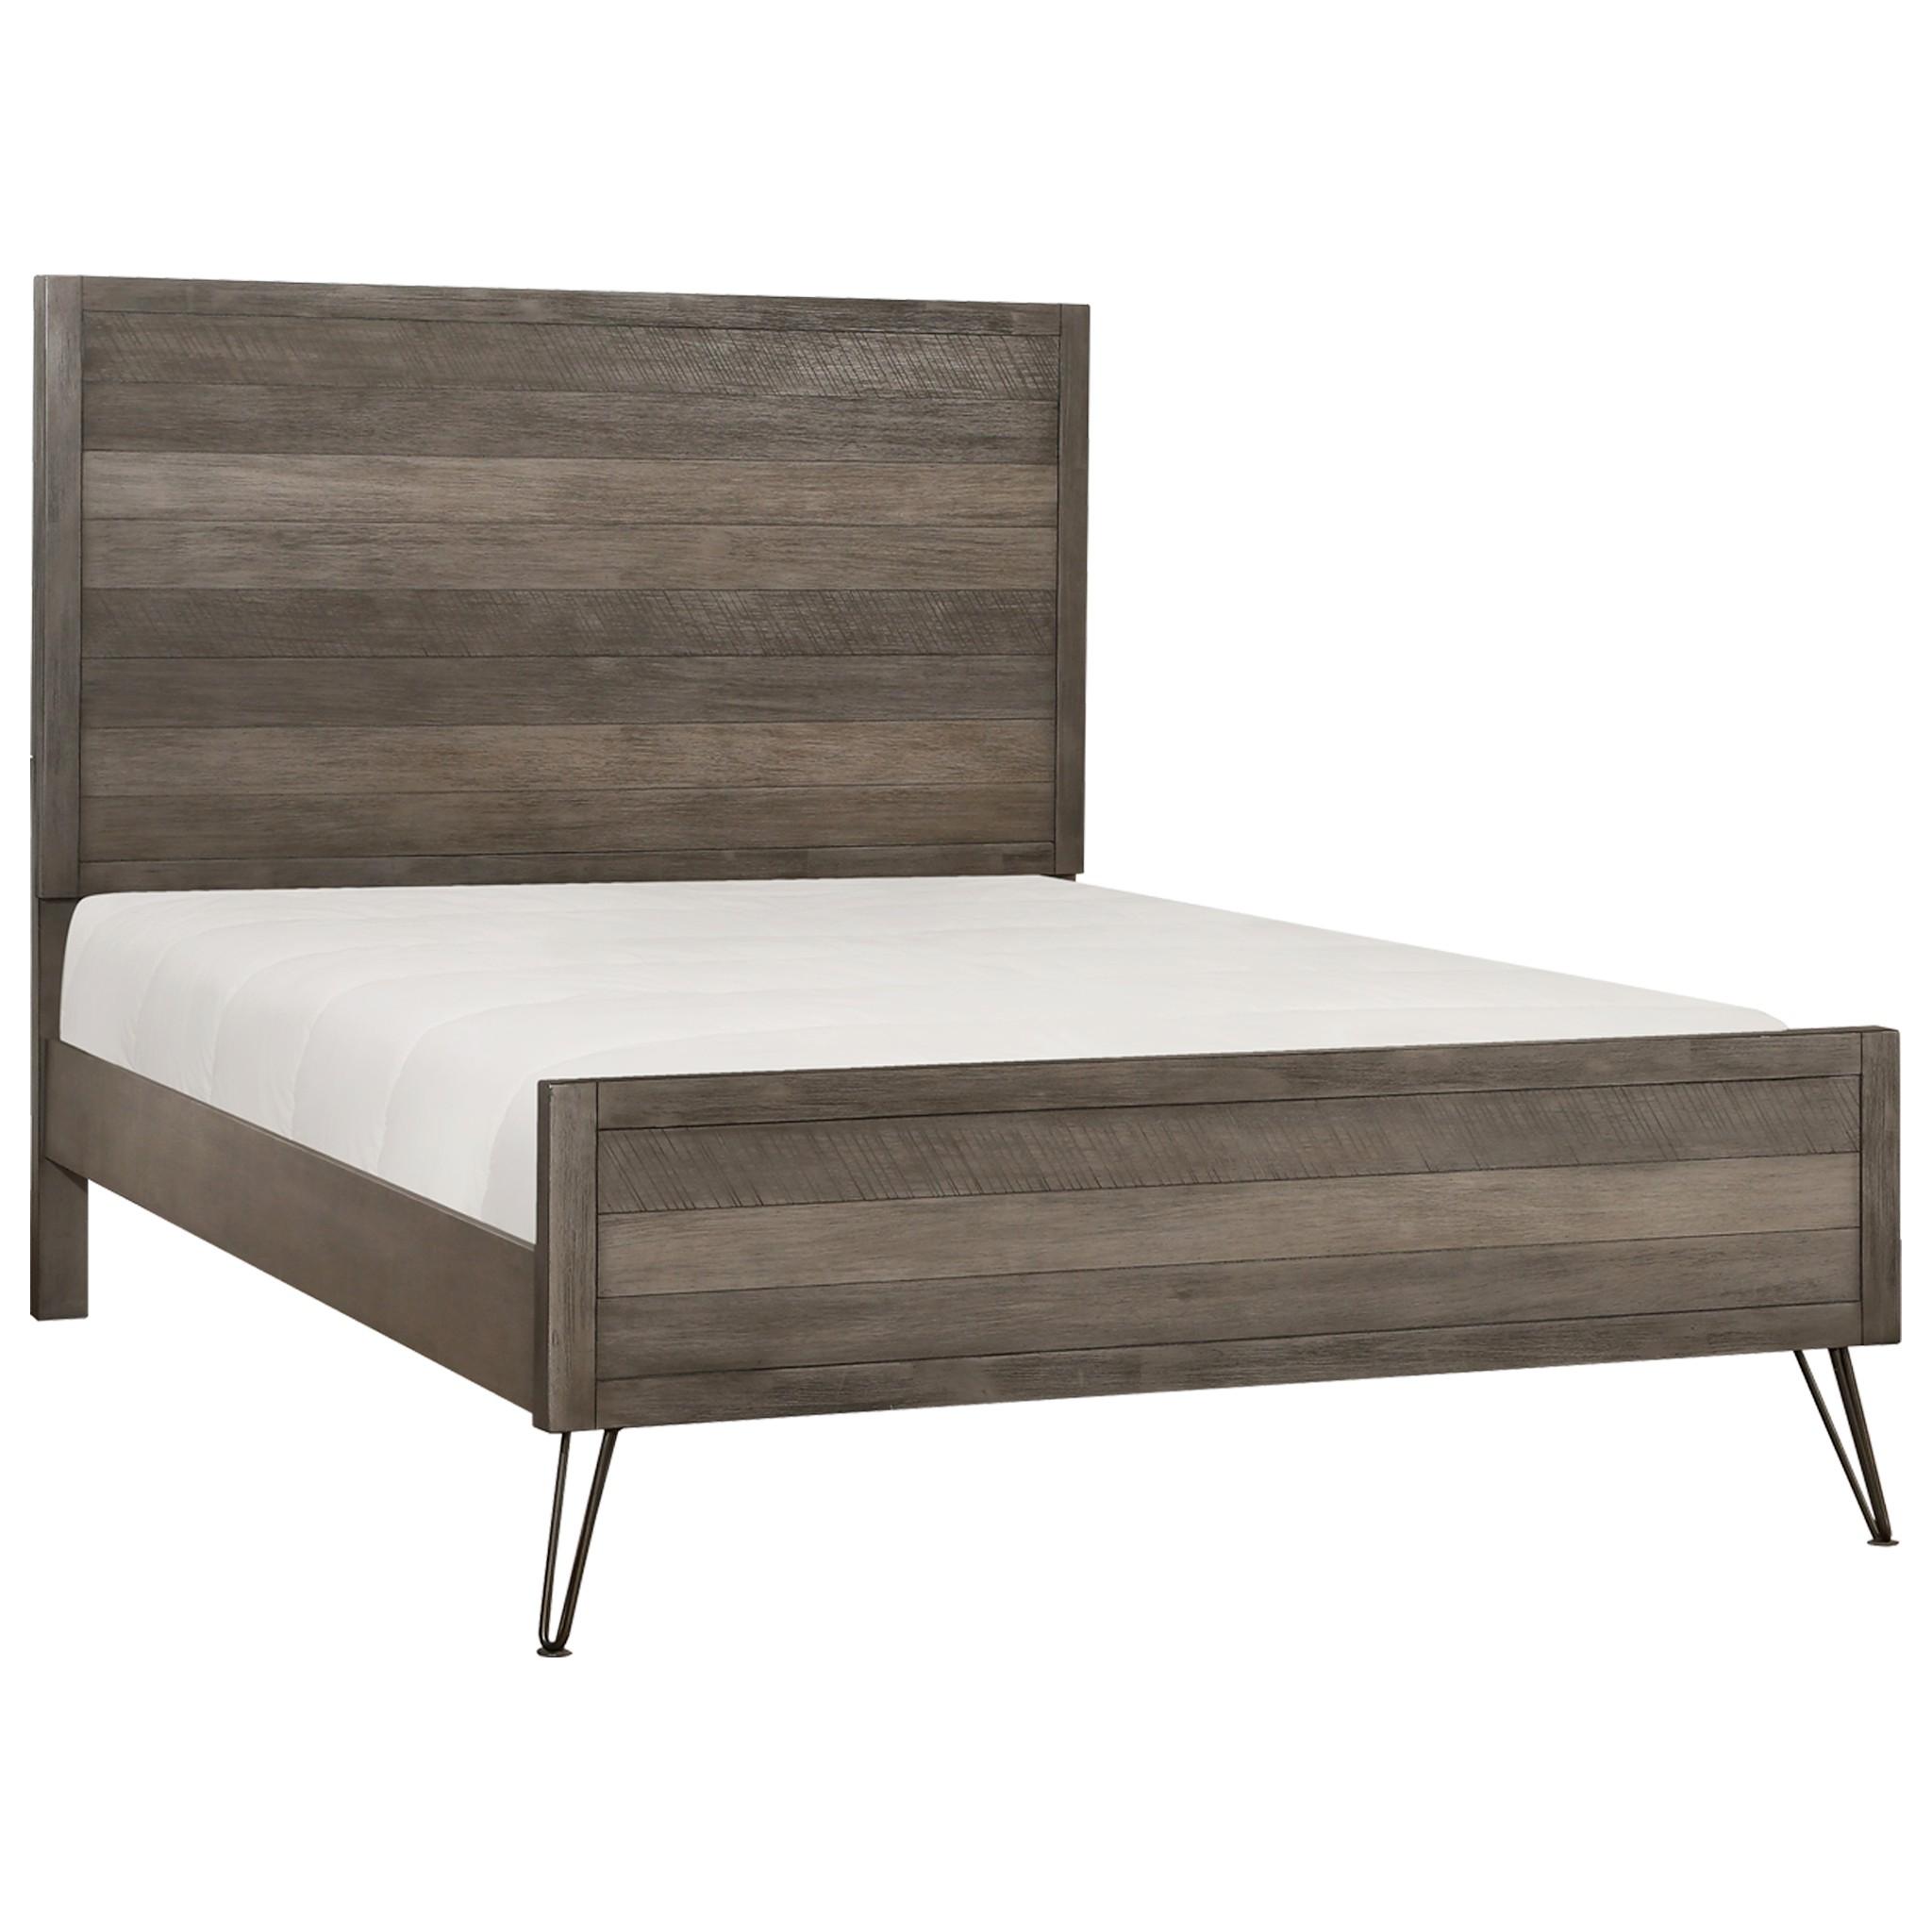 

    
Contemporary 3-Tone Gray Wood Queen Bed Homelegance 1604-1* Urbanite
